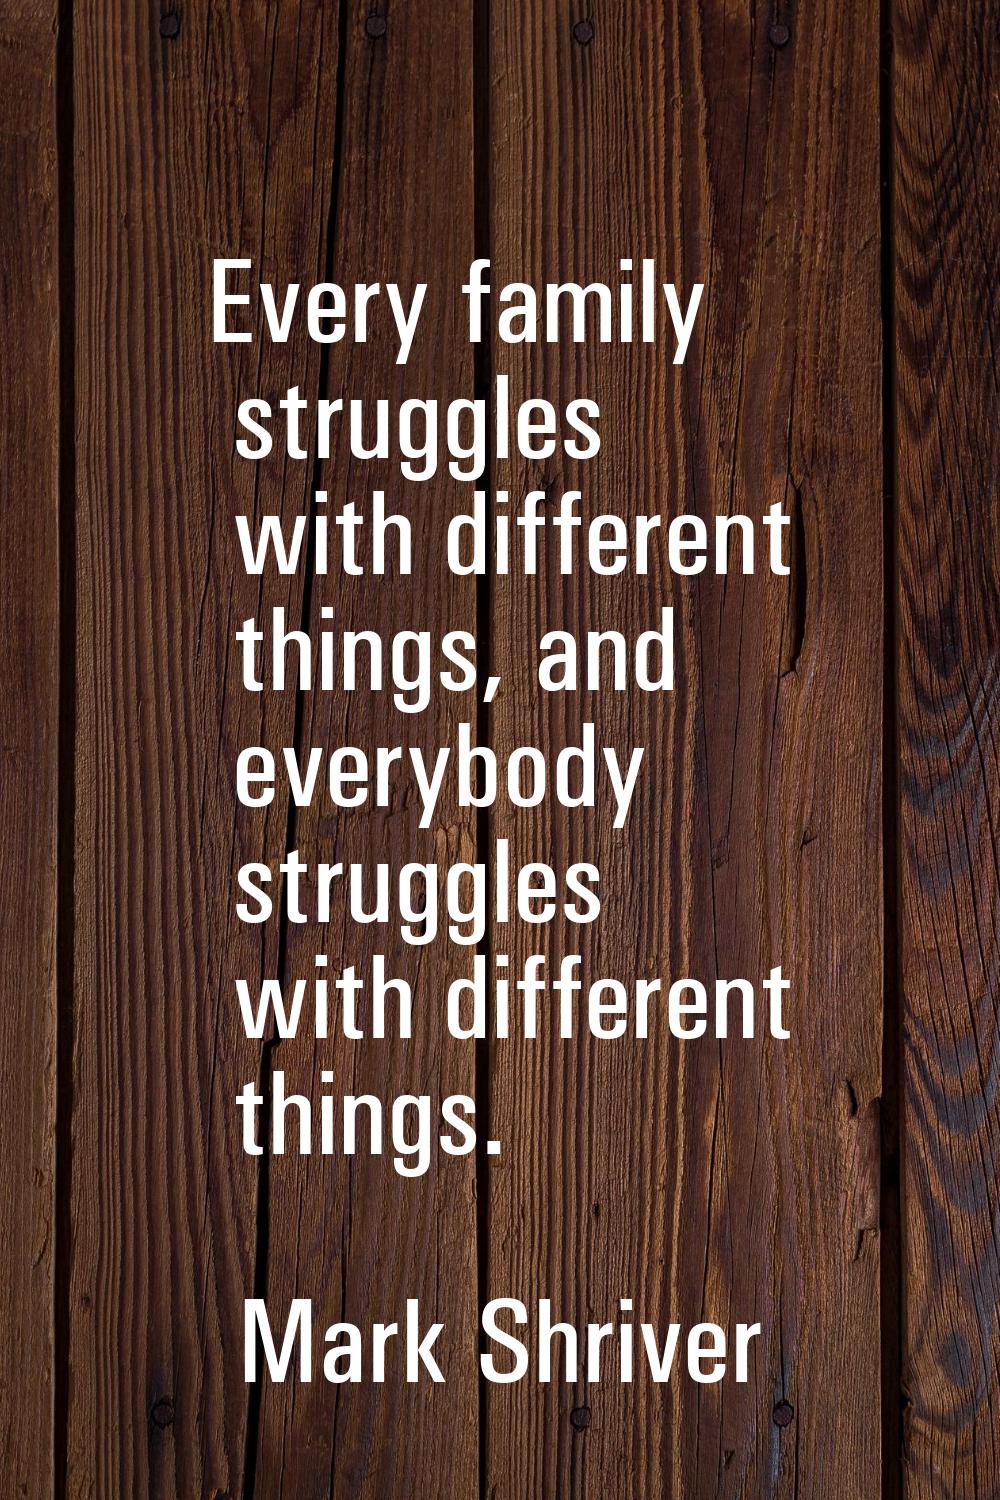 Every family struggles with different things, and everybody struggles with different things.